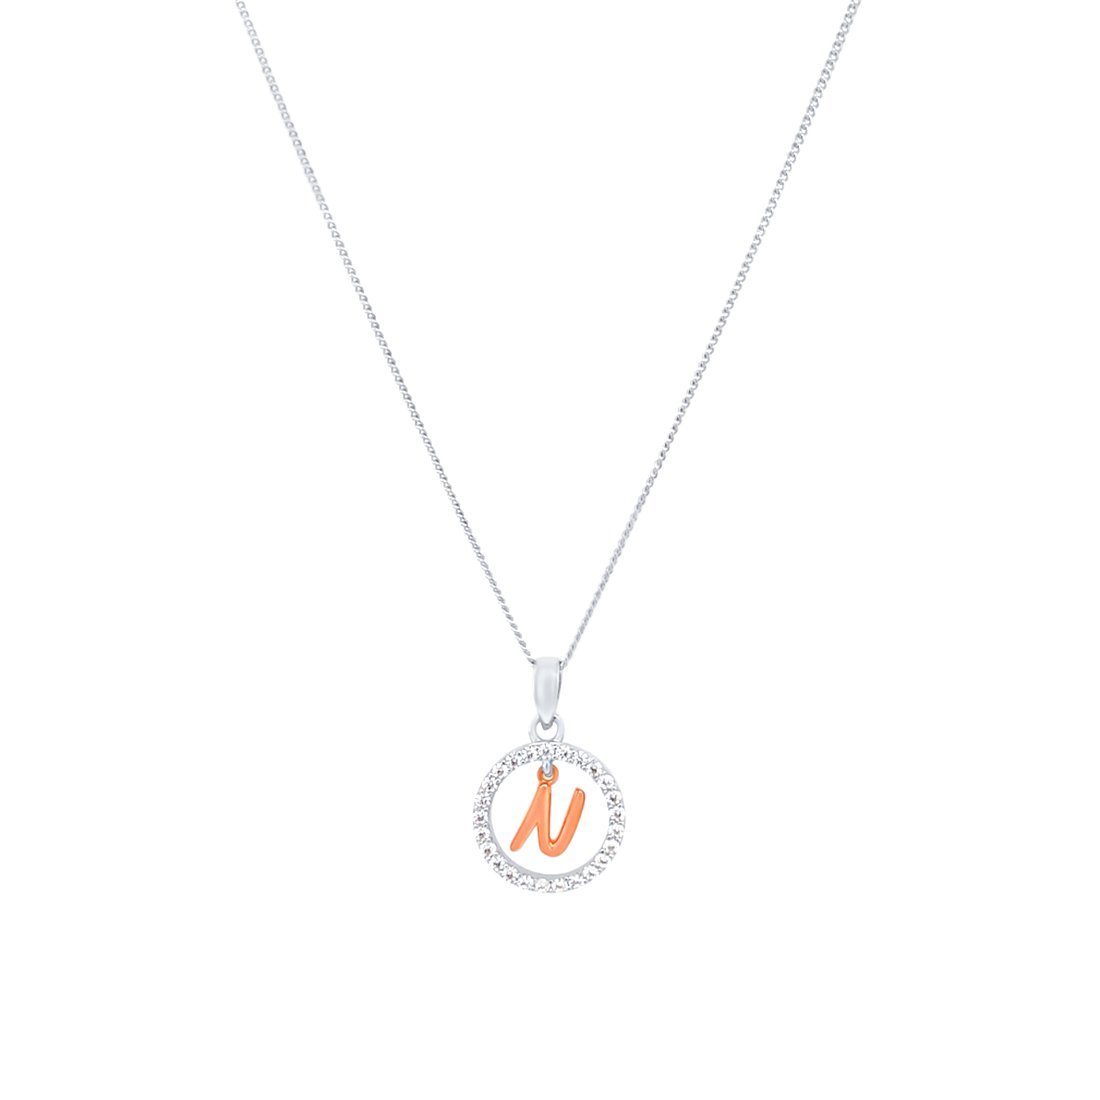 Sterling Silver & Rose Plated Initial Necklace with Cubic Zirconias Necklaces Bevilles N 